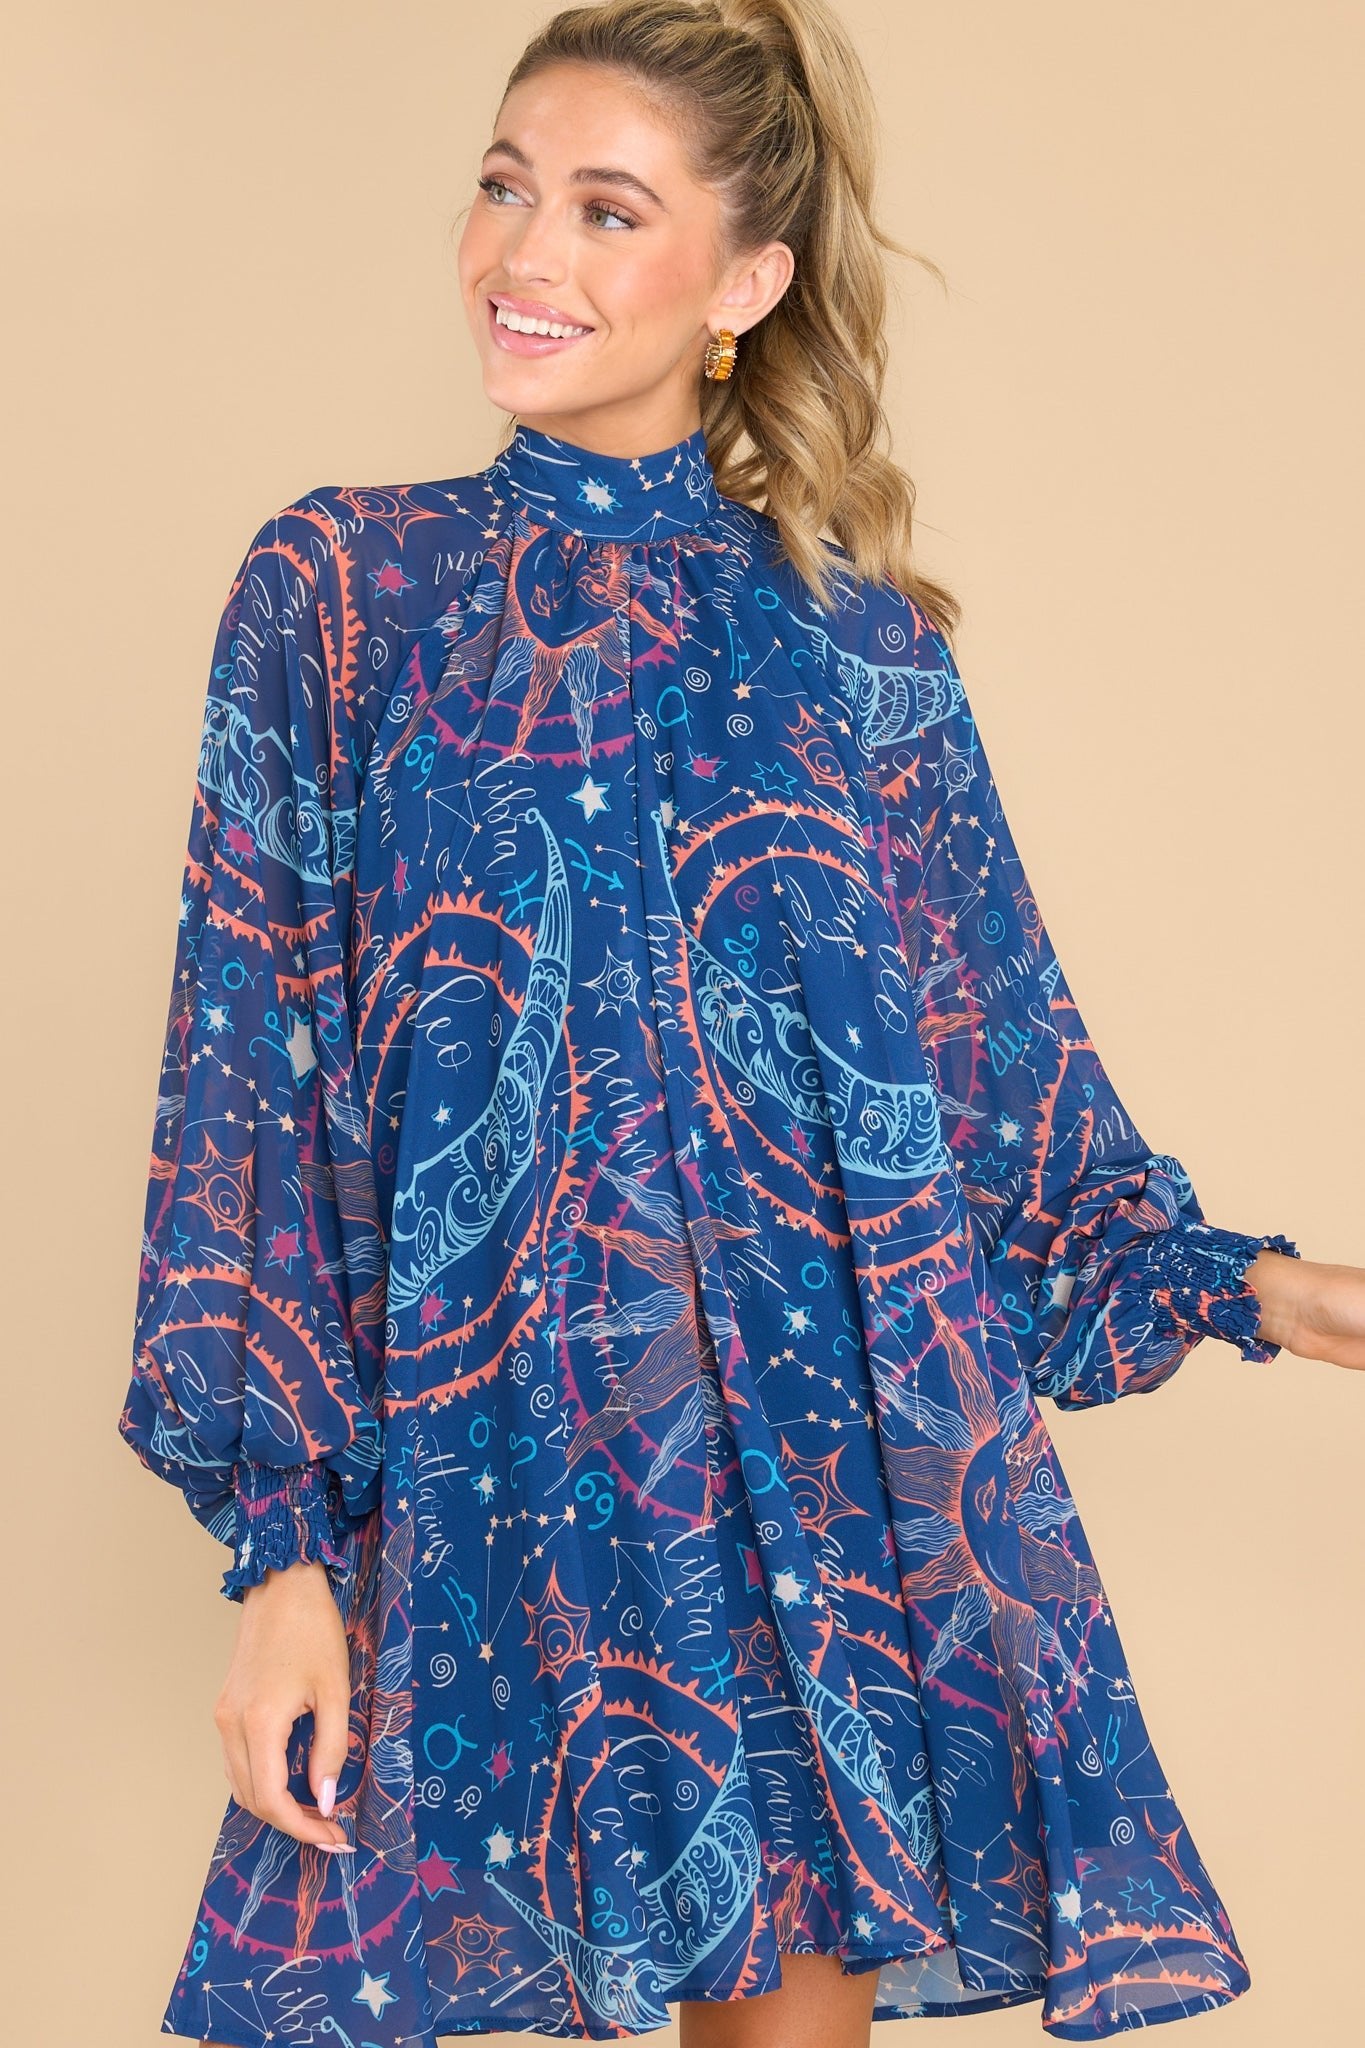 Front view of this dress that showcases the astrological print in shades of pink, orange, and blue.